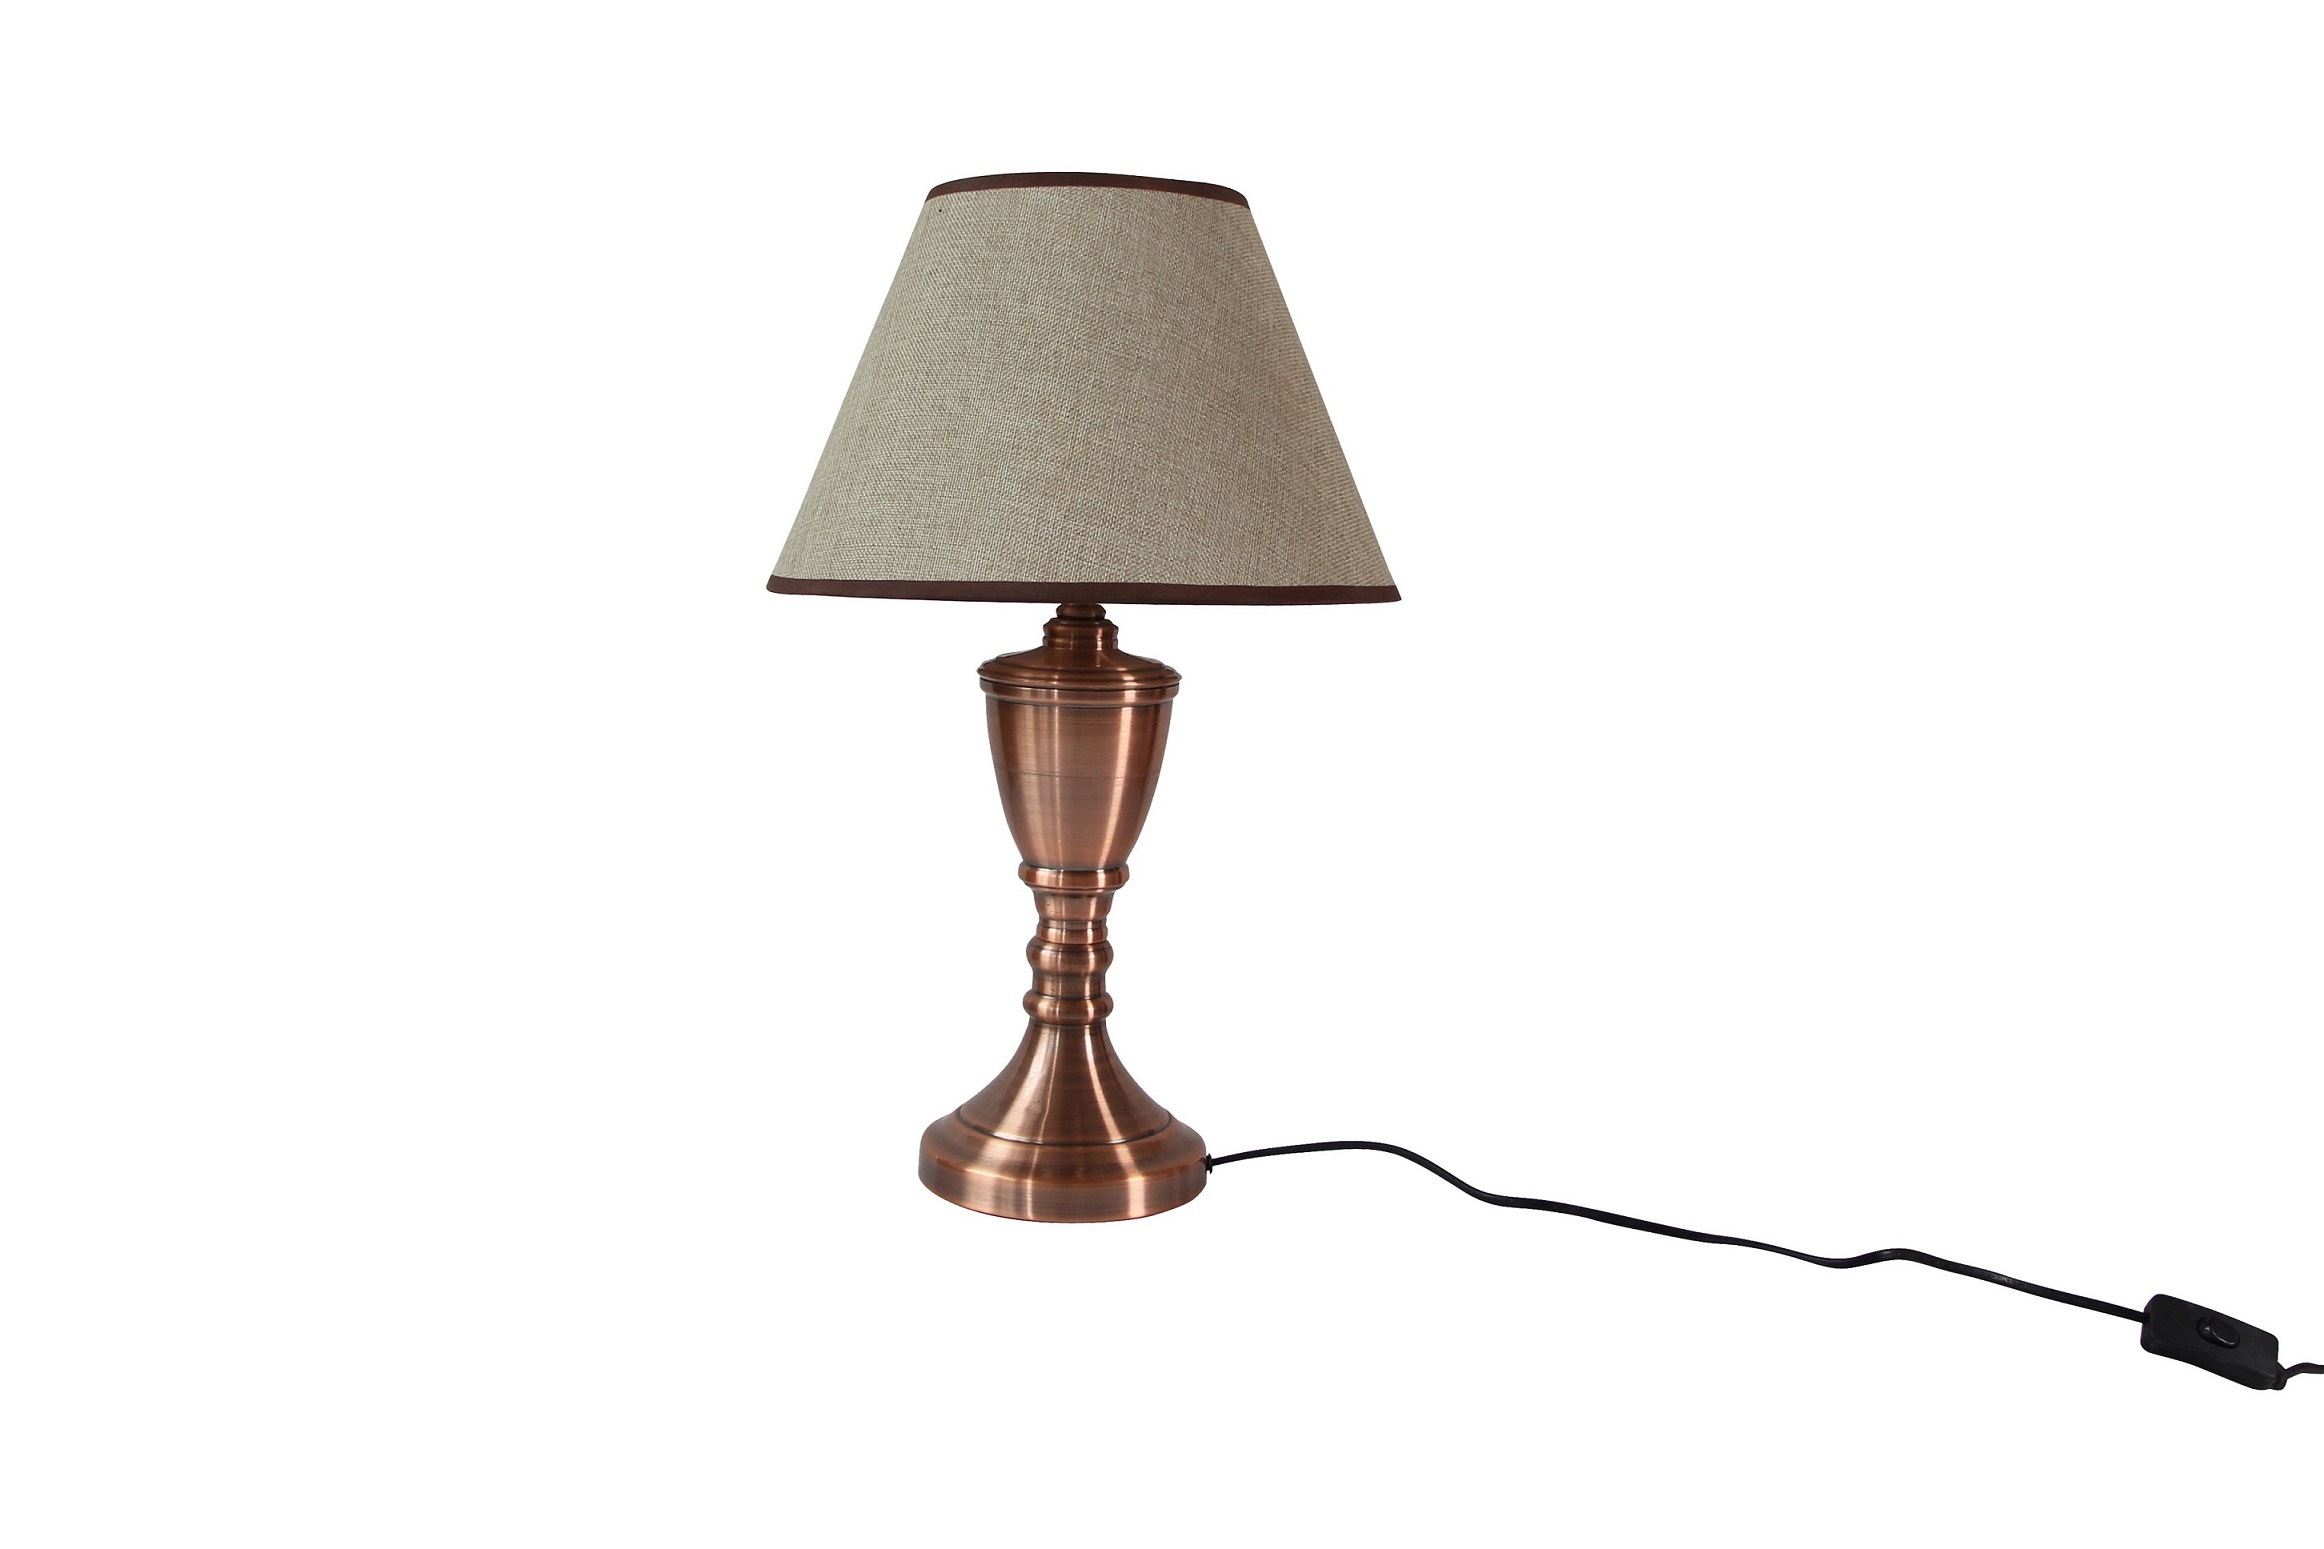 Modern Style Table Lamp with Red Copper Base (KO96TS)